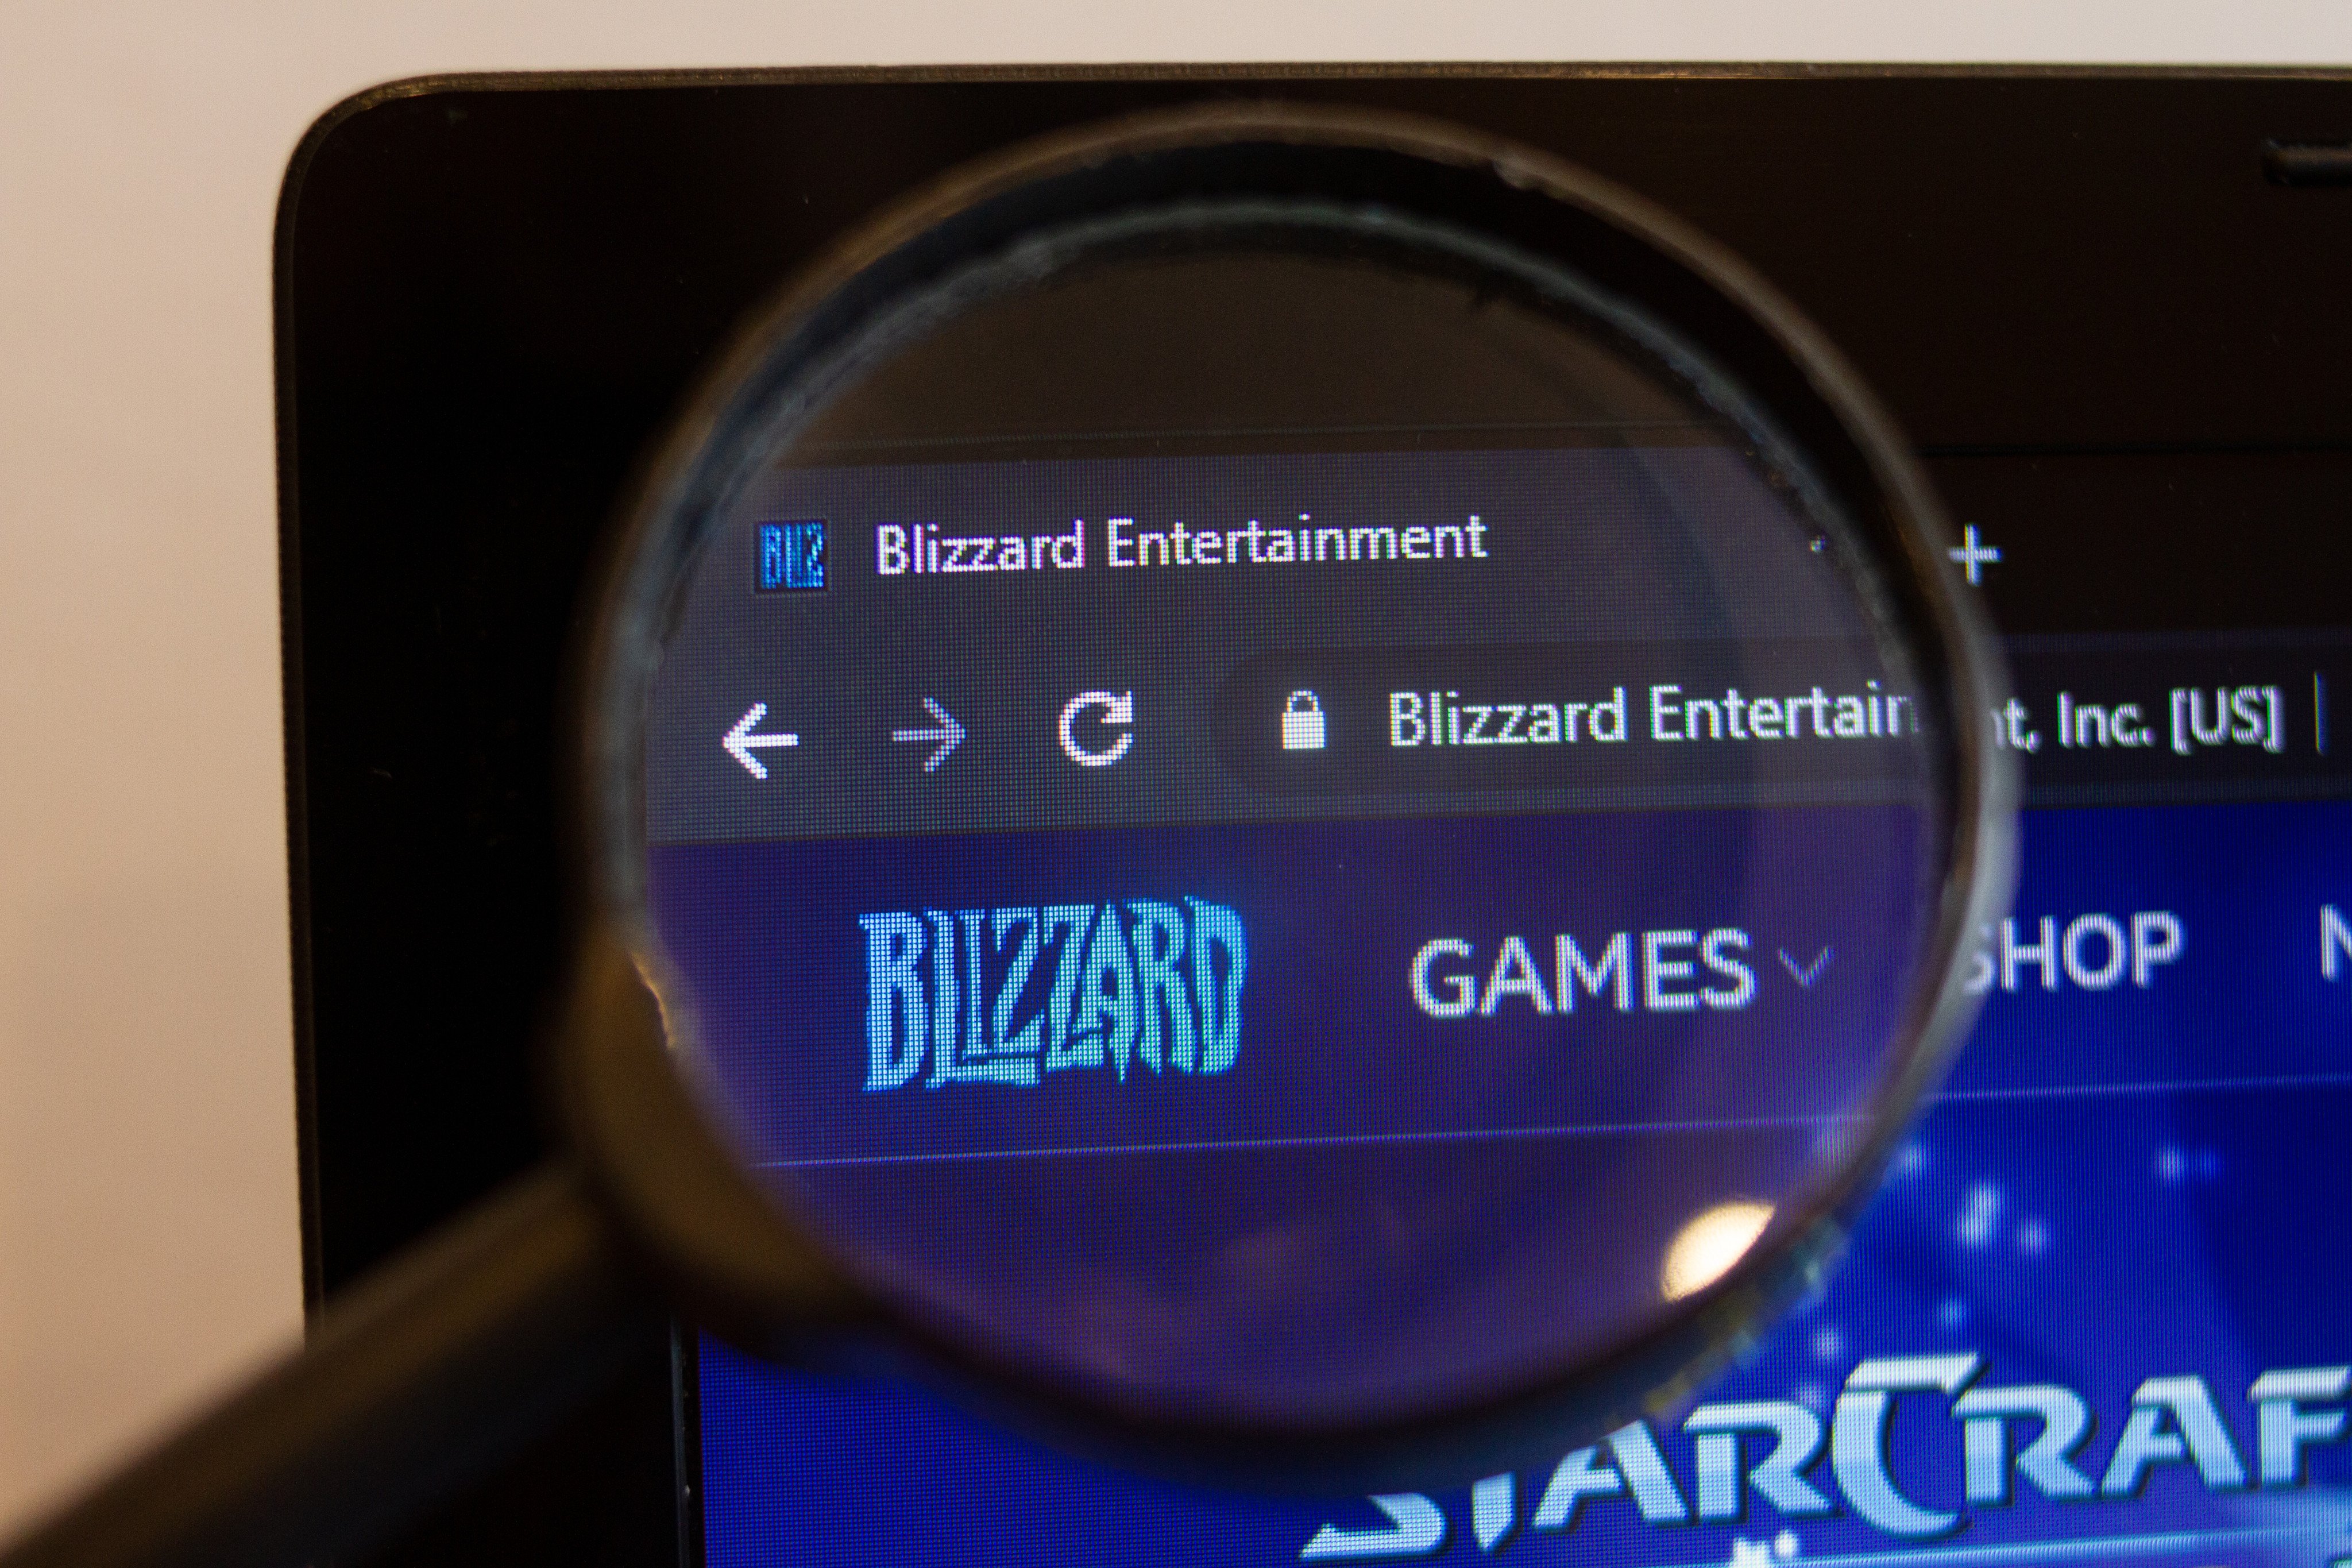 Blizzard Entertainment asserts that it is not in breach of any licensing deal and that former partner NetEase appears to be complaining about a standard industry practice. Photo: Shutterstock